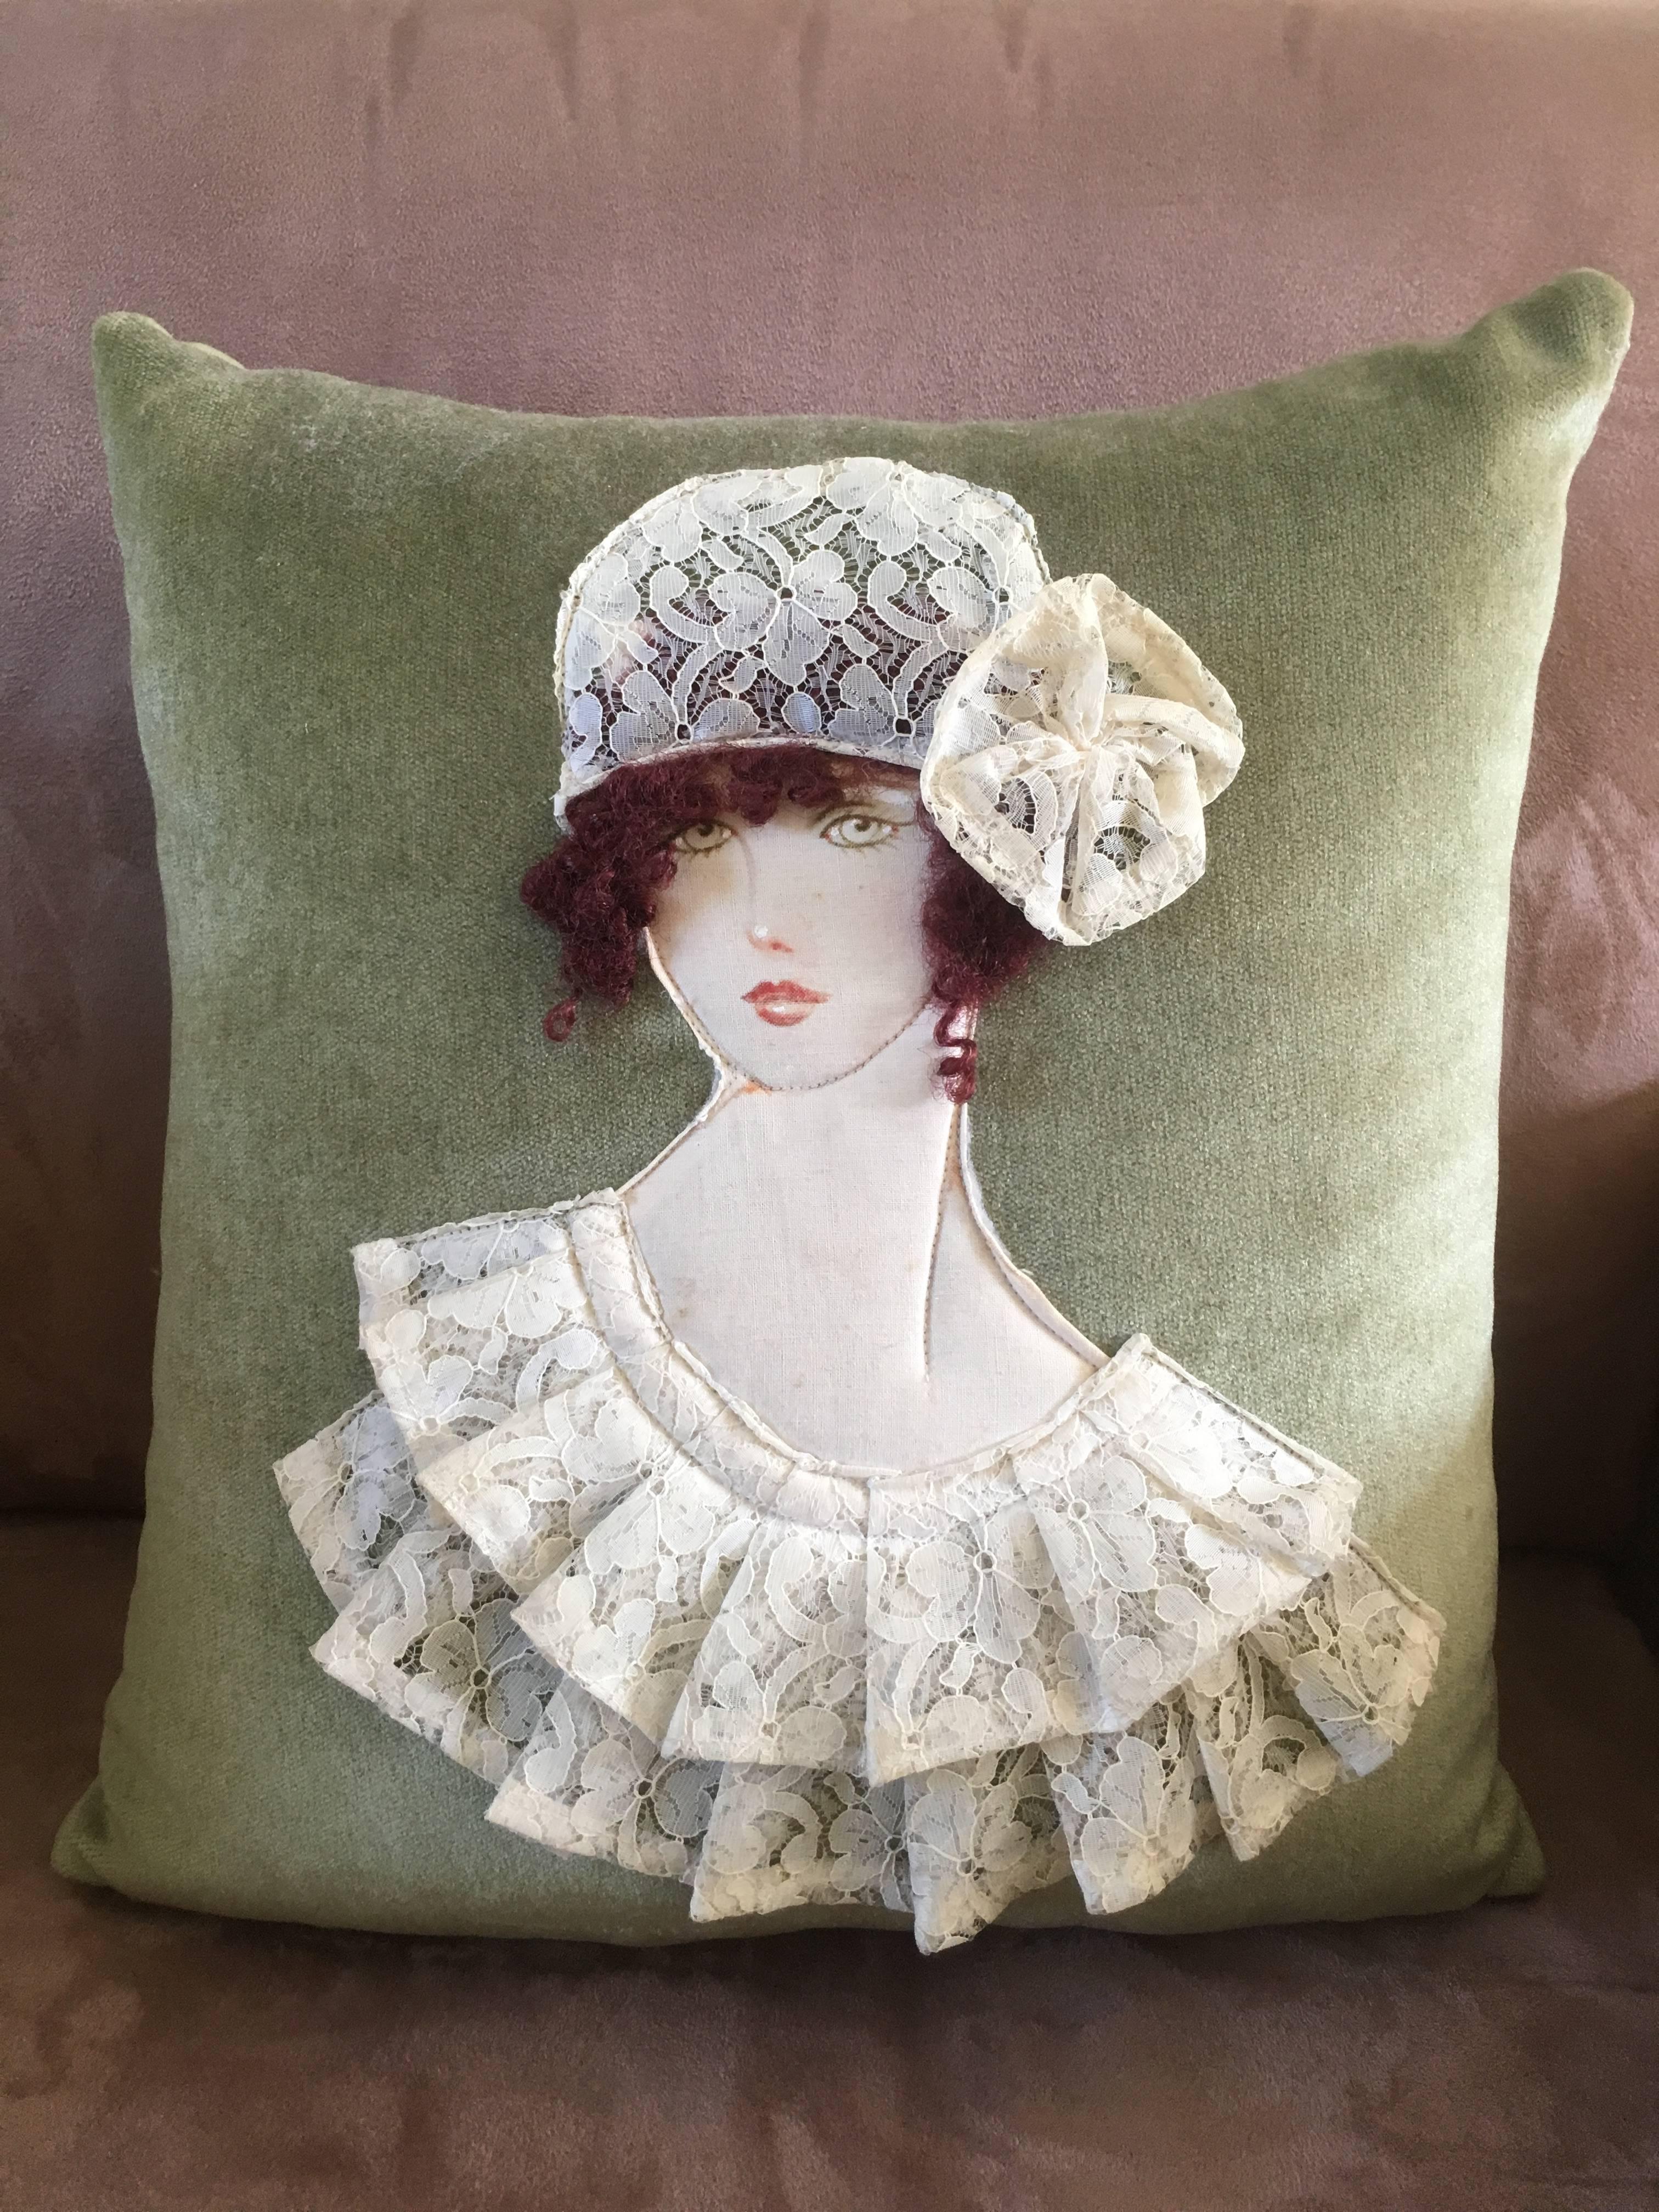 Unique Art Deco handwoven art cushion in green velvet, representing a typical woman model of the 1920s, in France.
The decor is embossed, consisting of a hat, a flower and a dress in old lace and curly hair in nylon. The green eyes and the lace